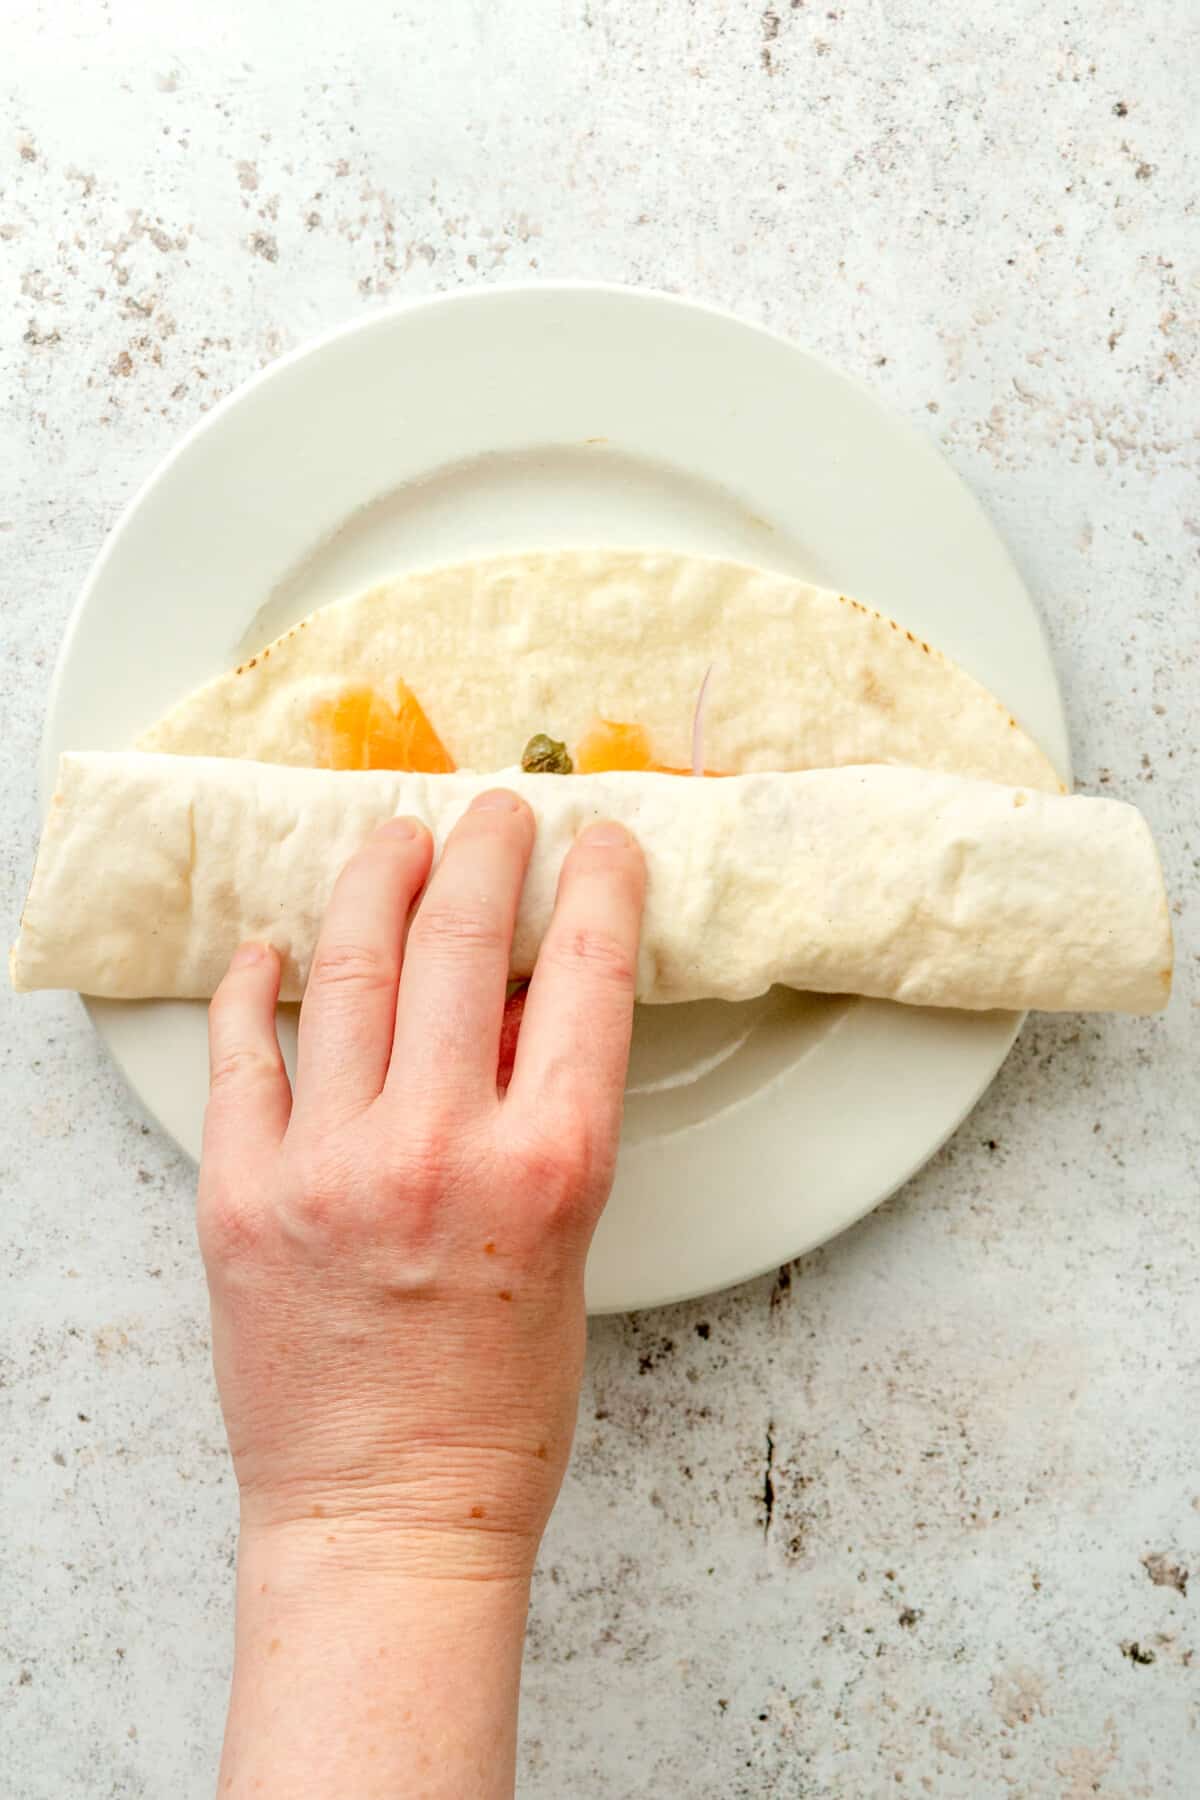 A smoked salmon lunch wrap is rolled on a white plate on a light grey surface.